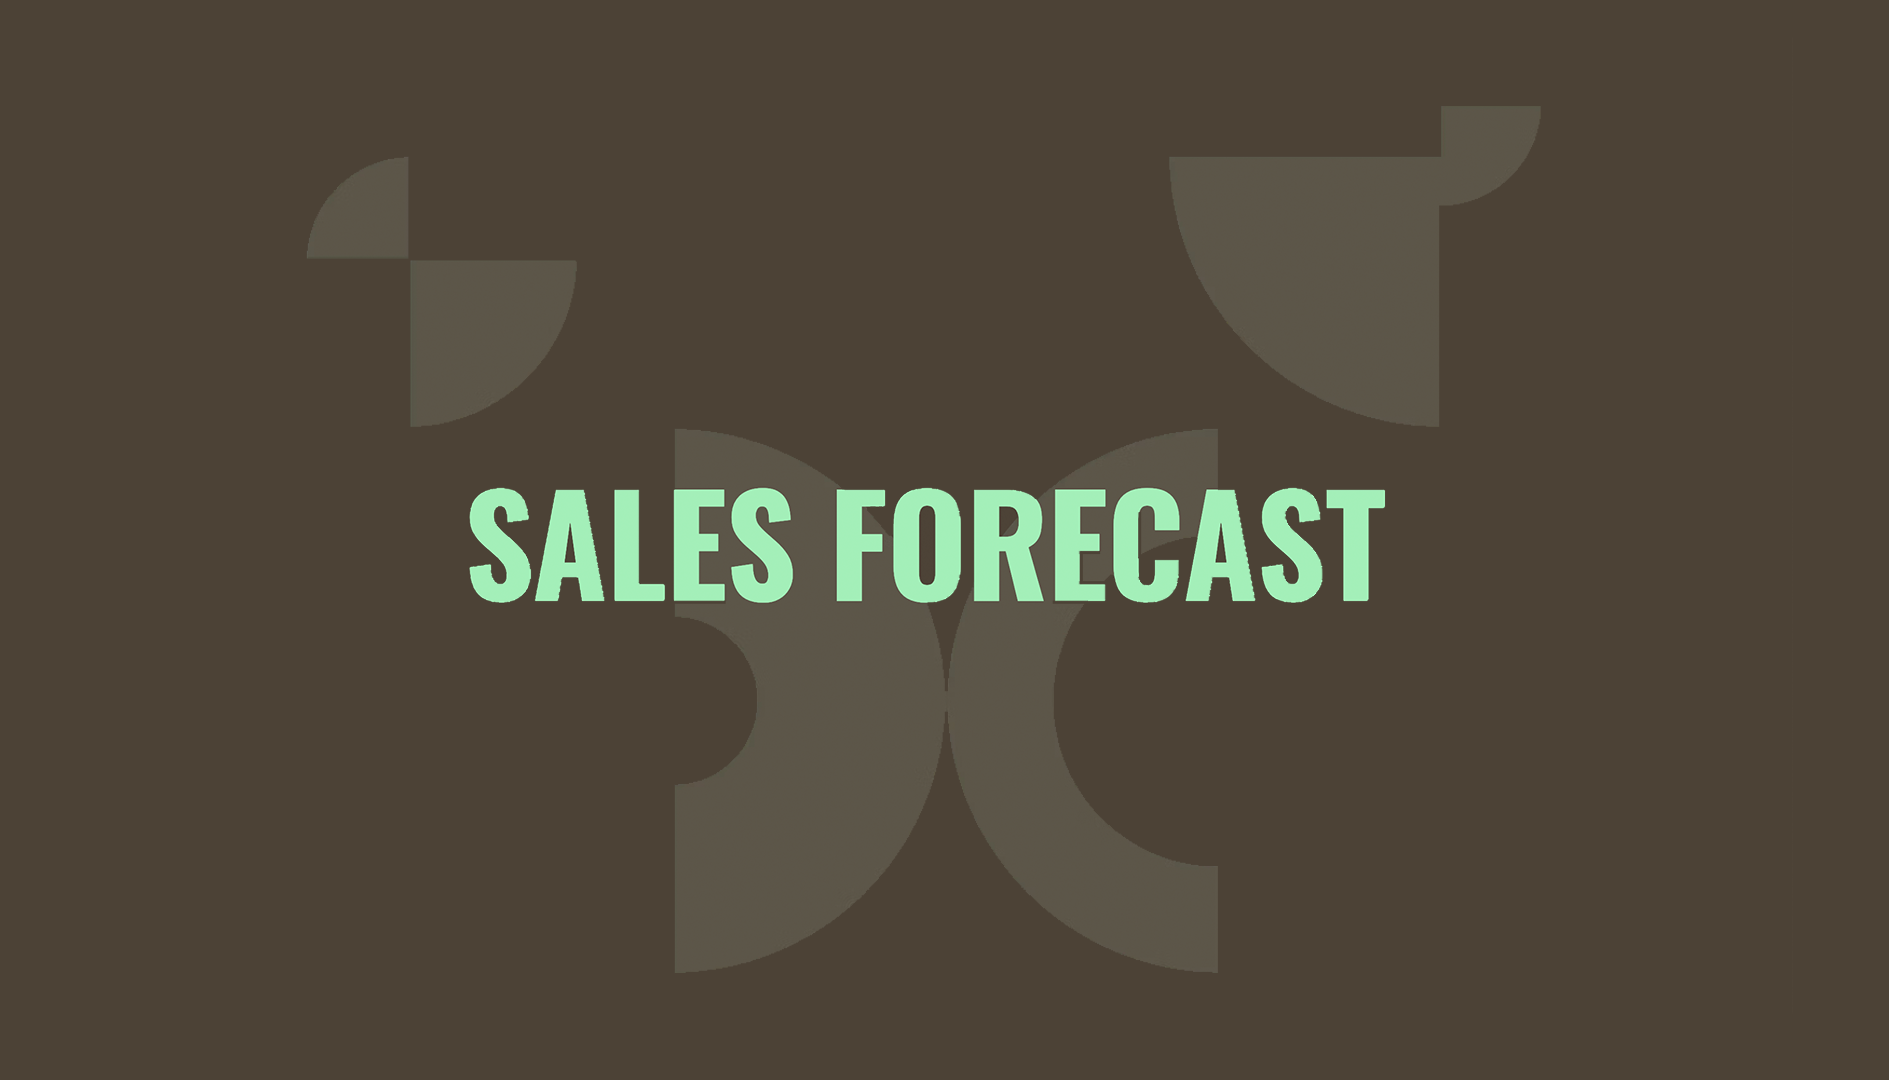 Sales Forecast - Introduction